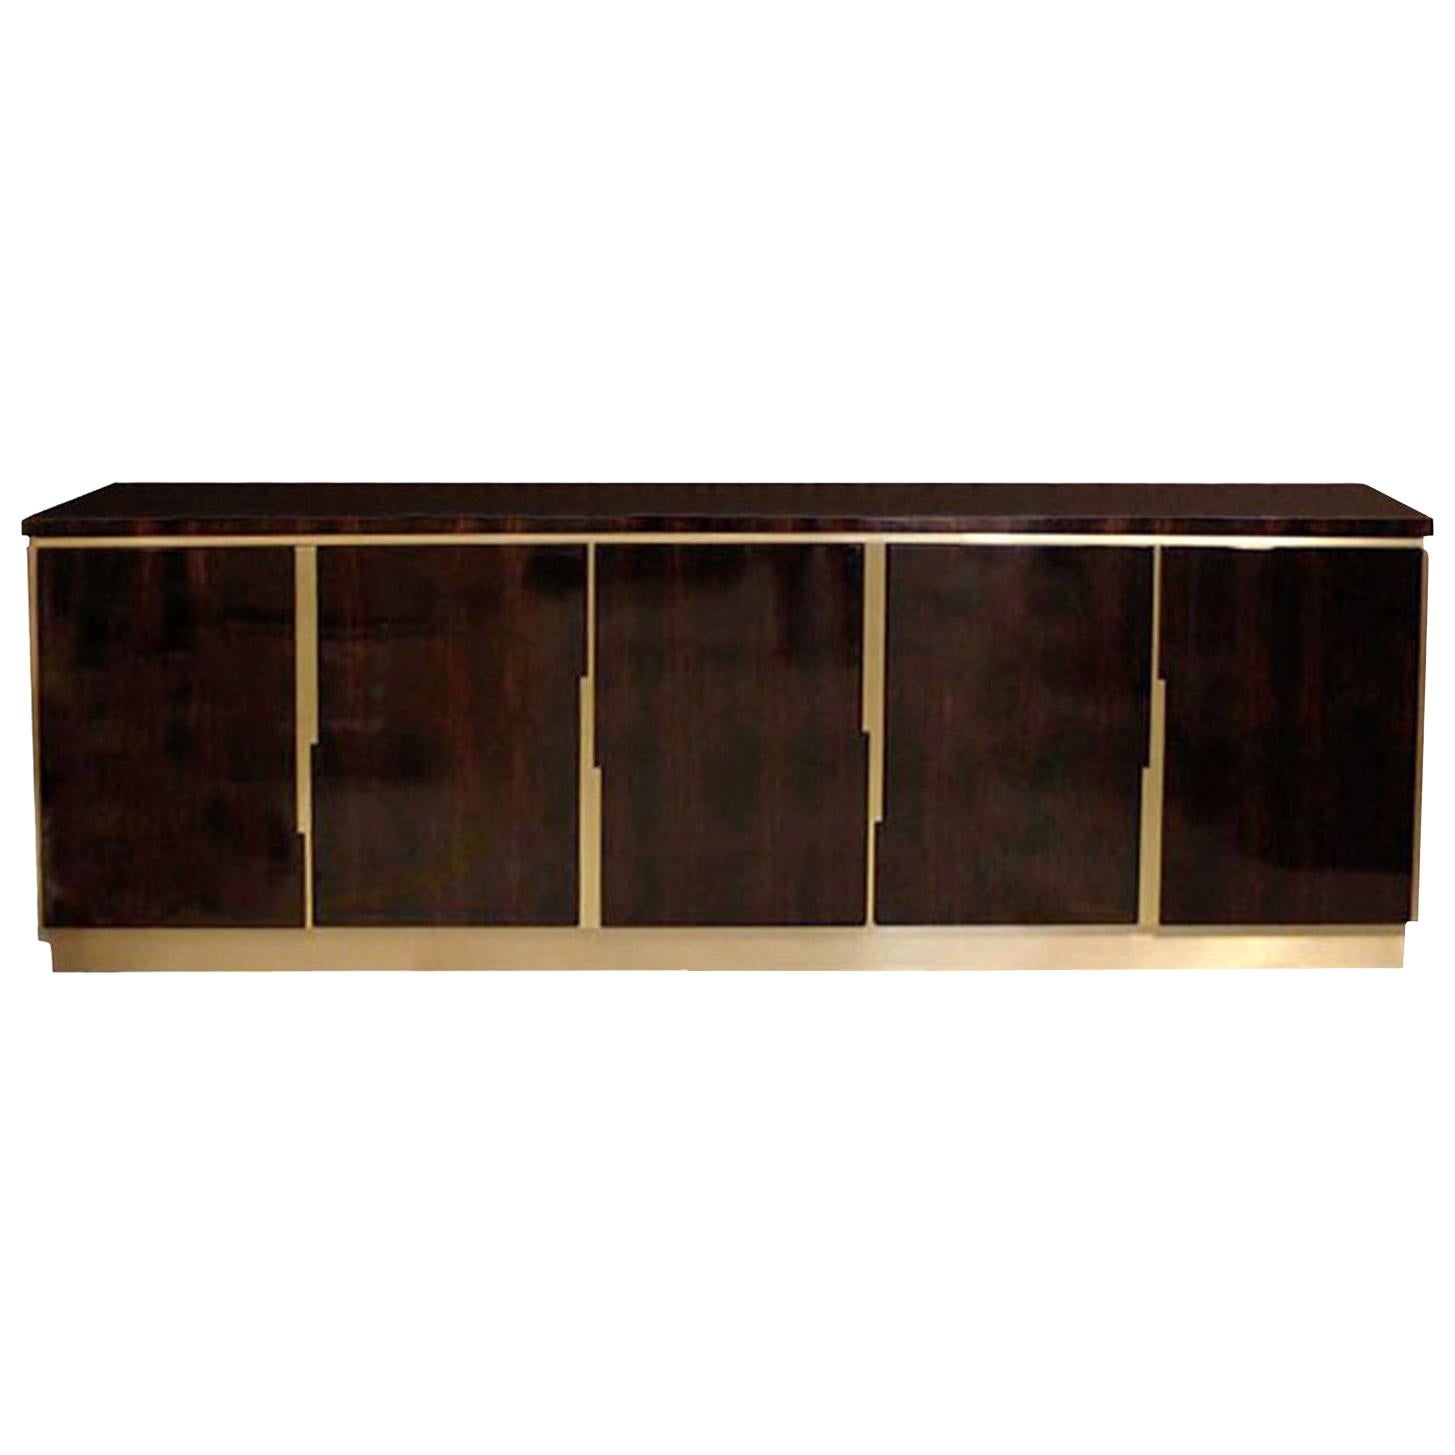 Marvic Sideboard / Buffet in Macassar Ebony Wood and Brass Metal